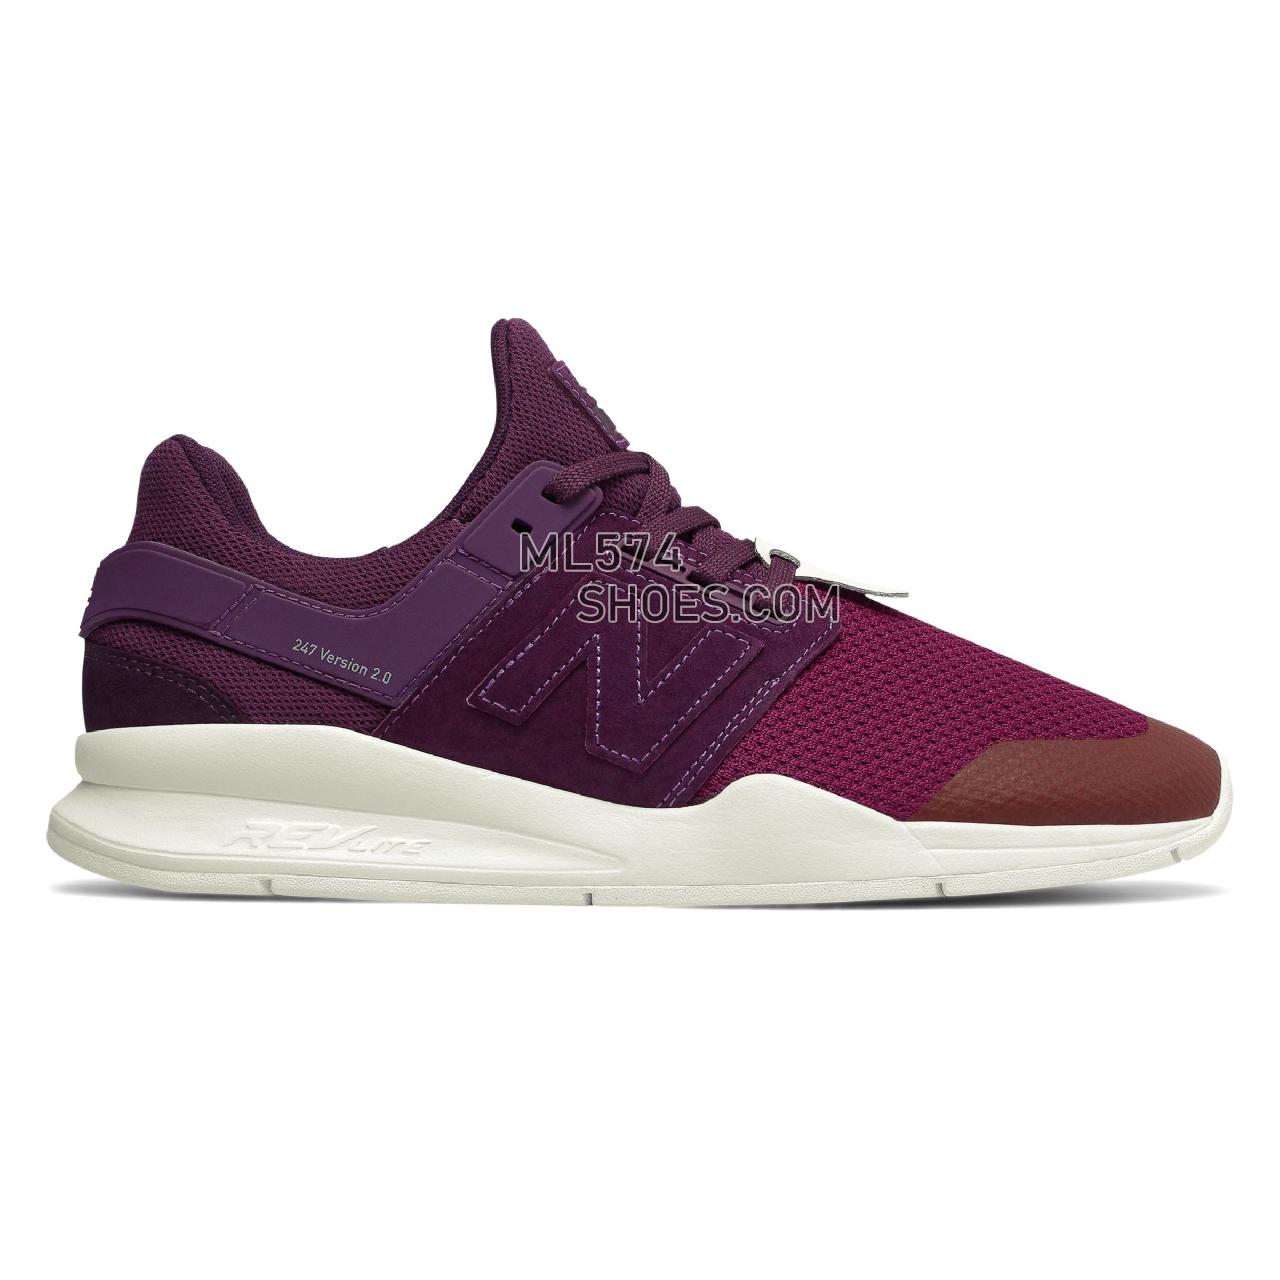 New Balance 247 Time Zone - Men's 247 - Classic Plum Purple with NB Scarlet - MS247NTK